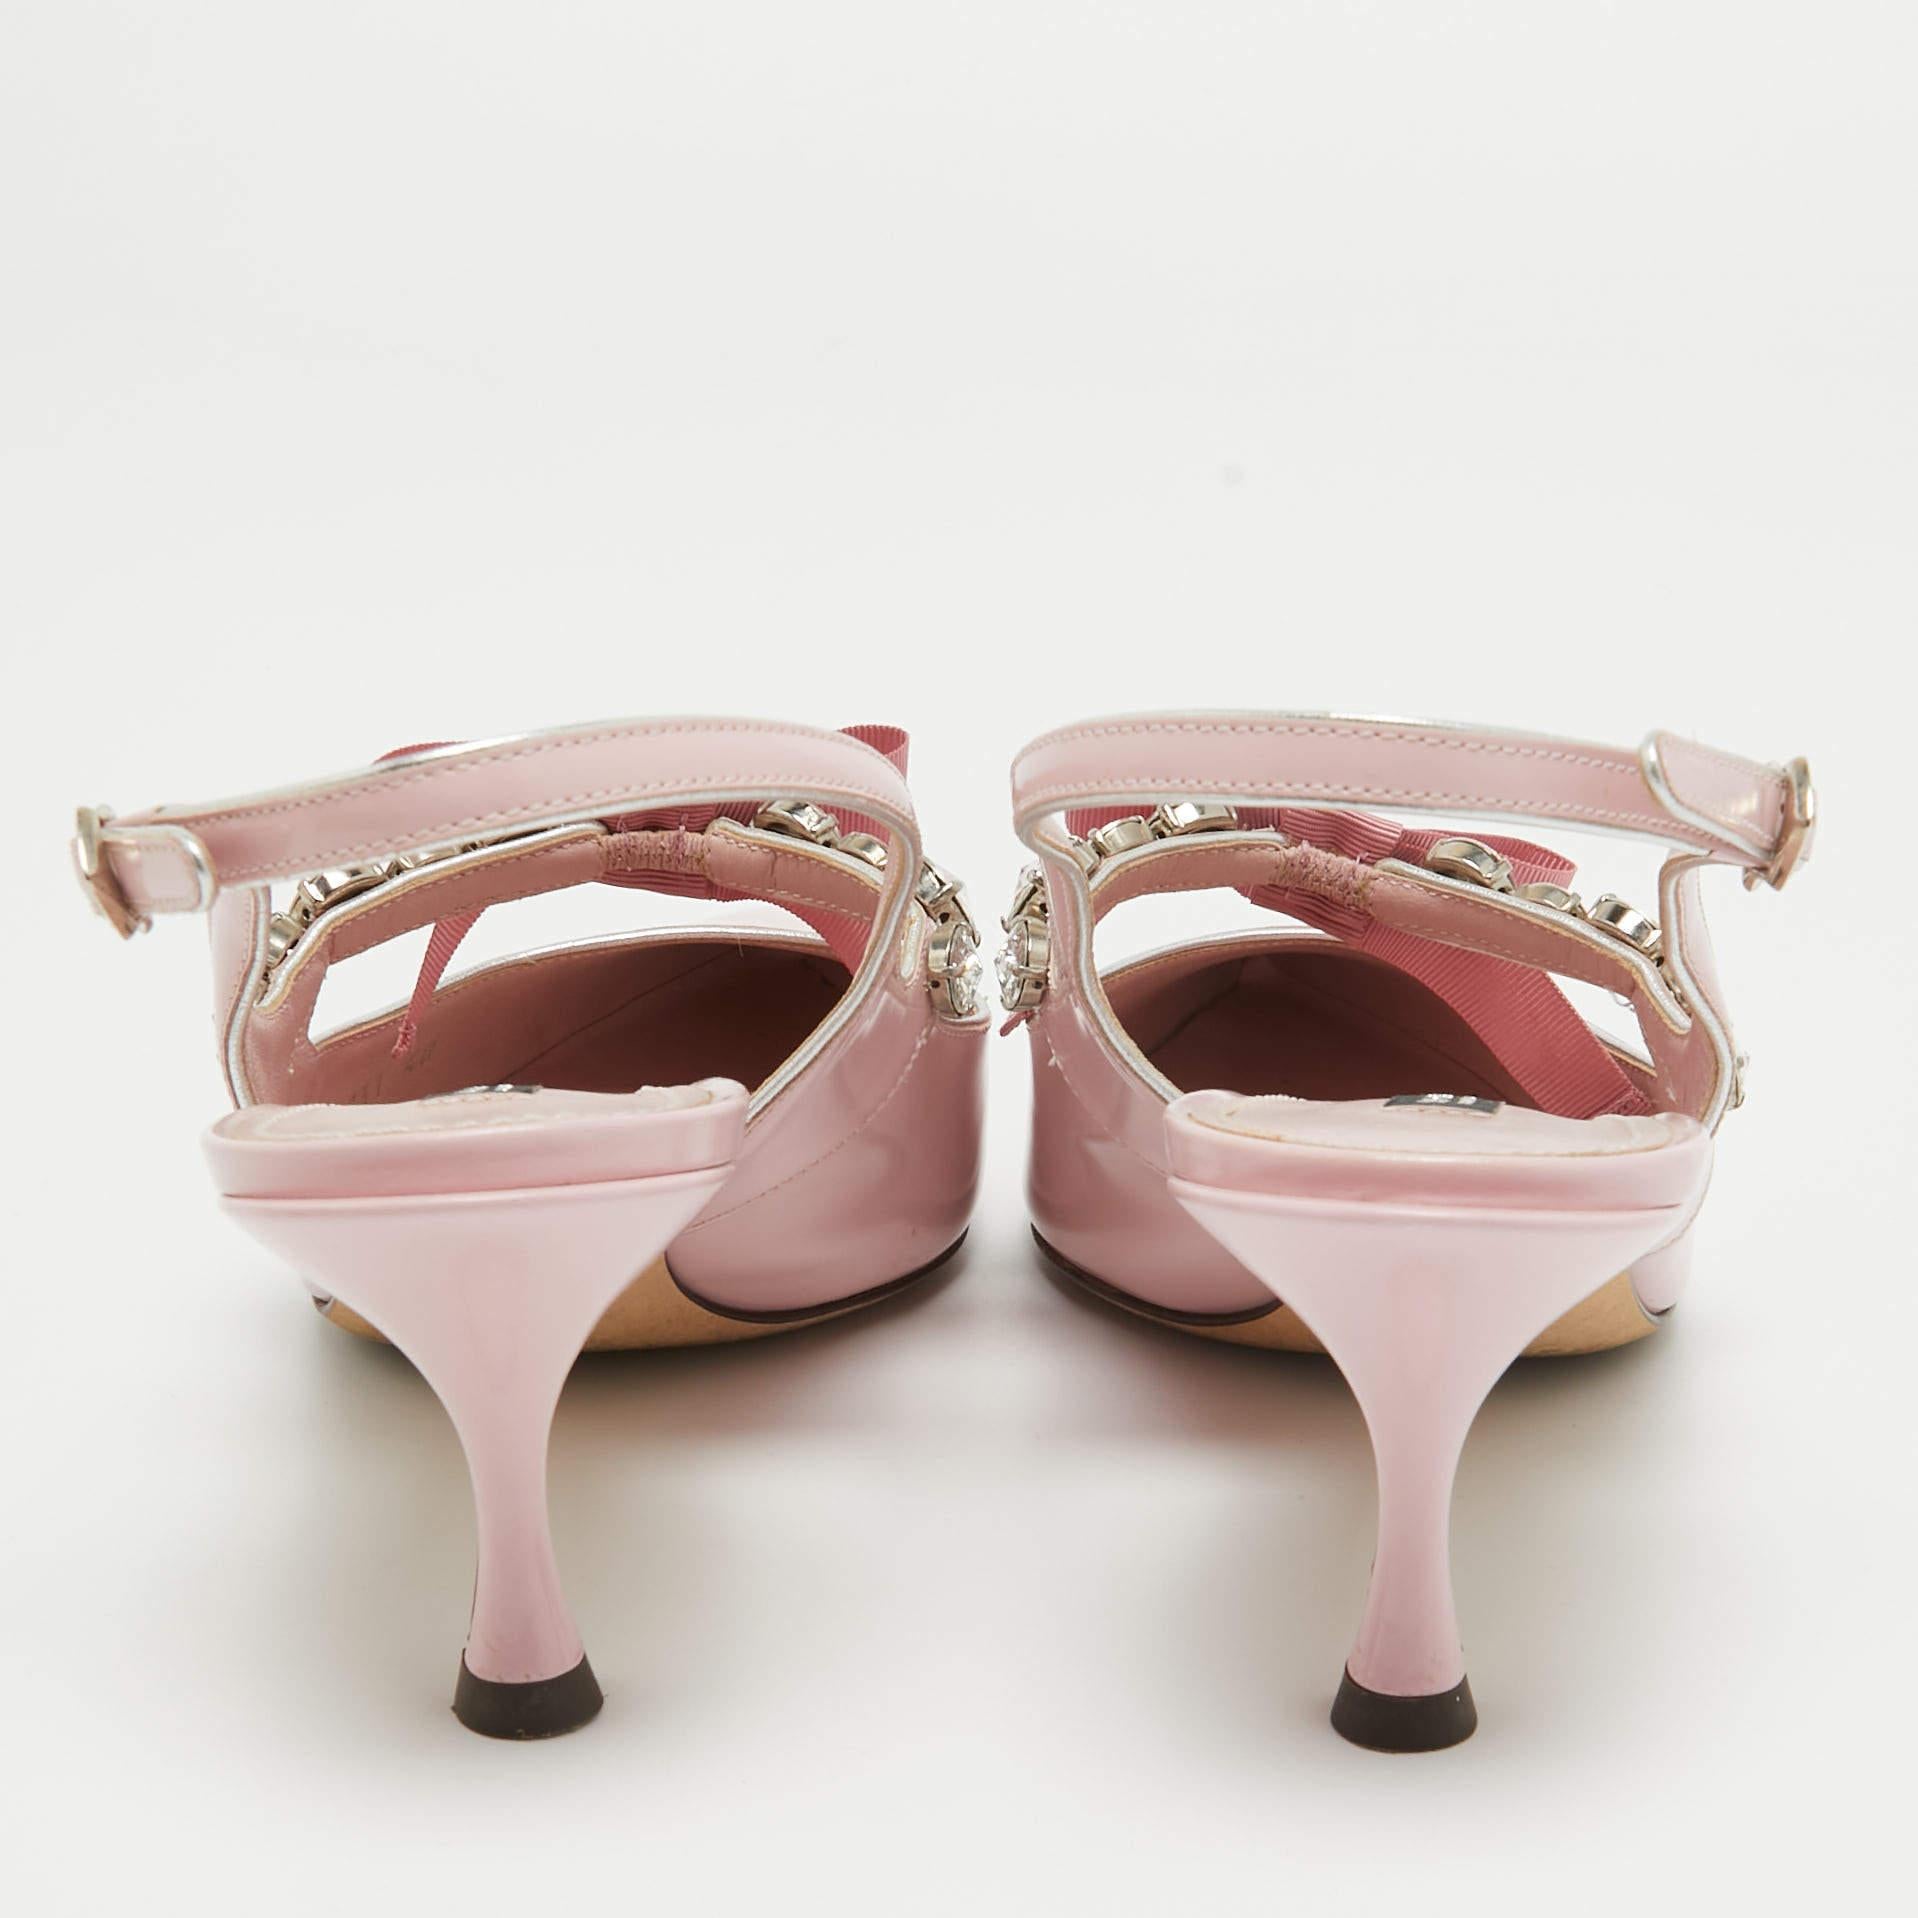 Dolce & Gabbana Pink Patent Leather Crystal Embellished Bow Slingback Pumps Size In Good Condition For Sale In Dubai, Al Qouz 2